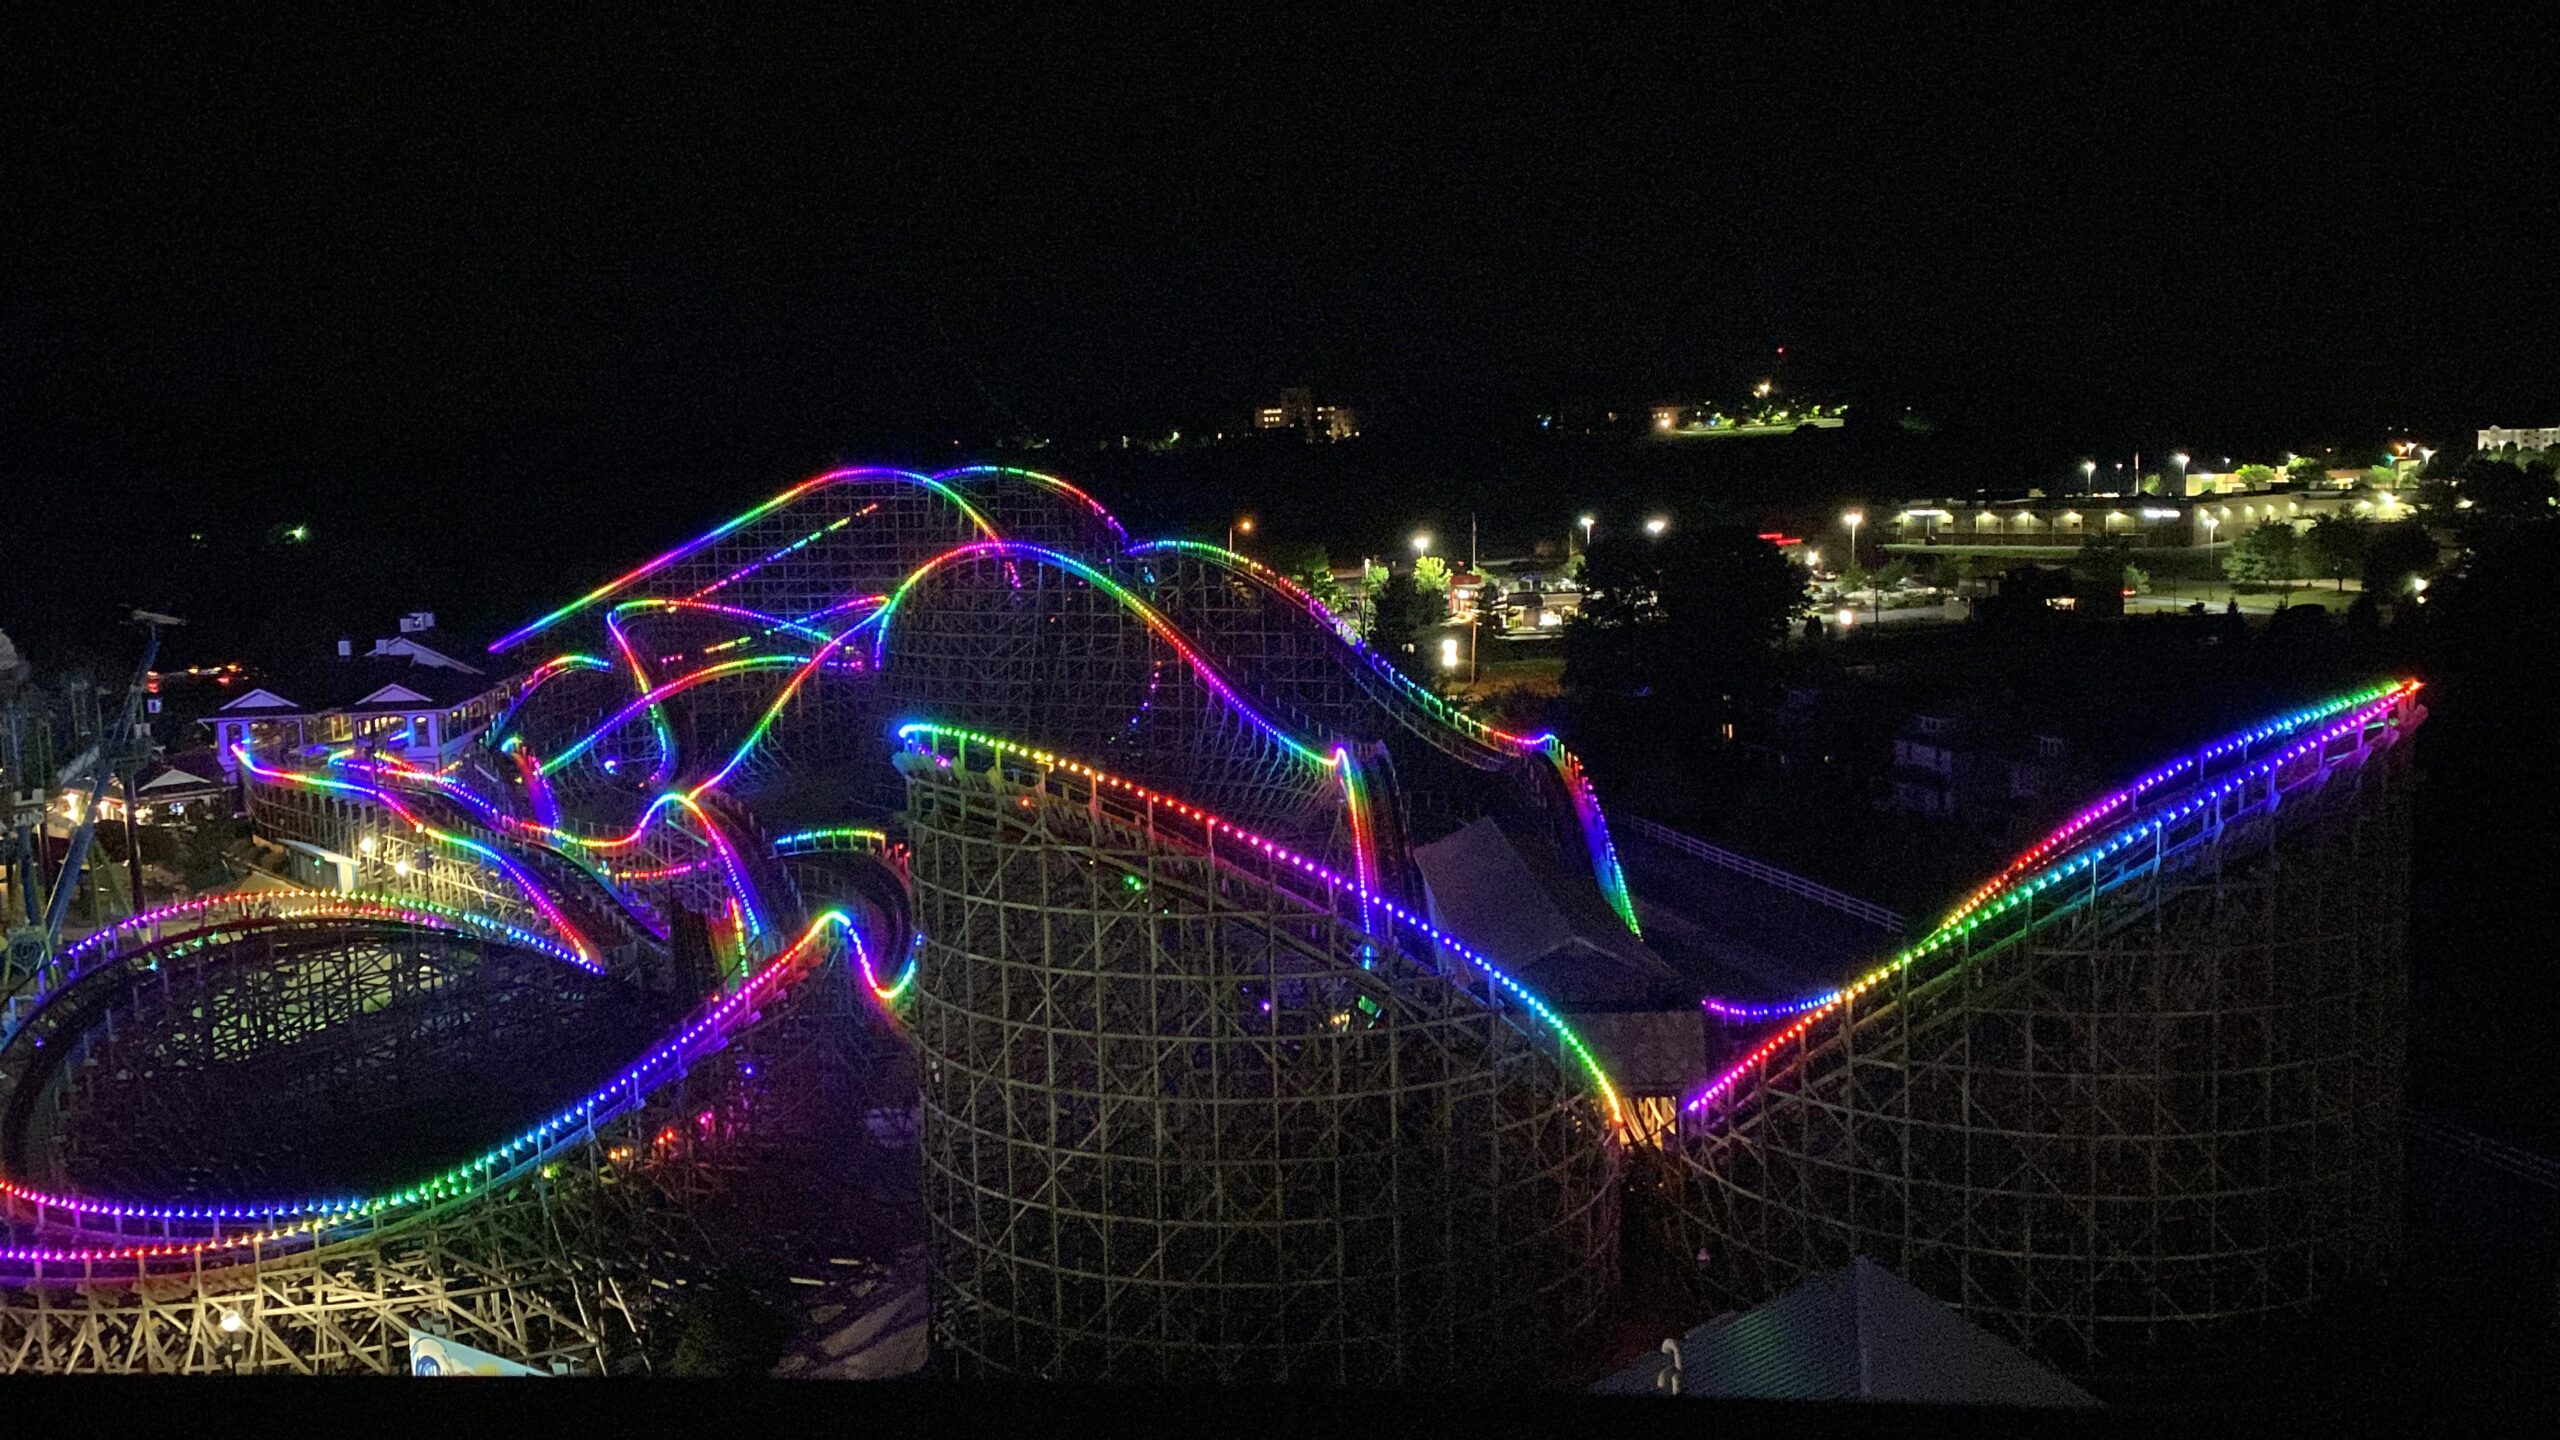 A Large Roller Coaster At Night Lit Up With Neon Lights.